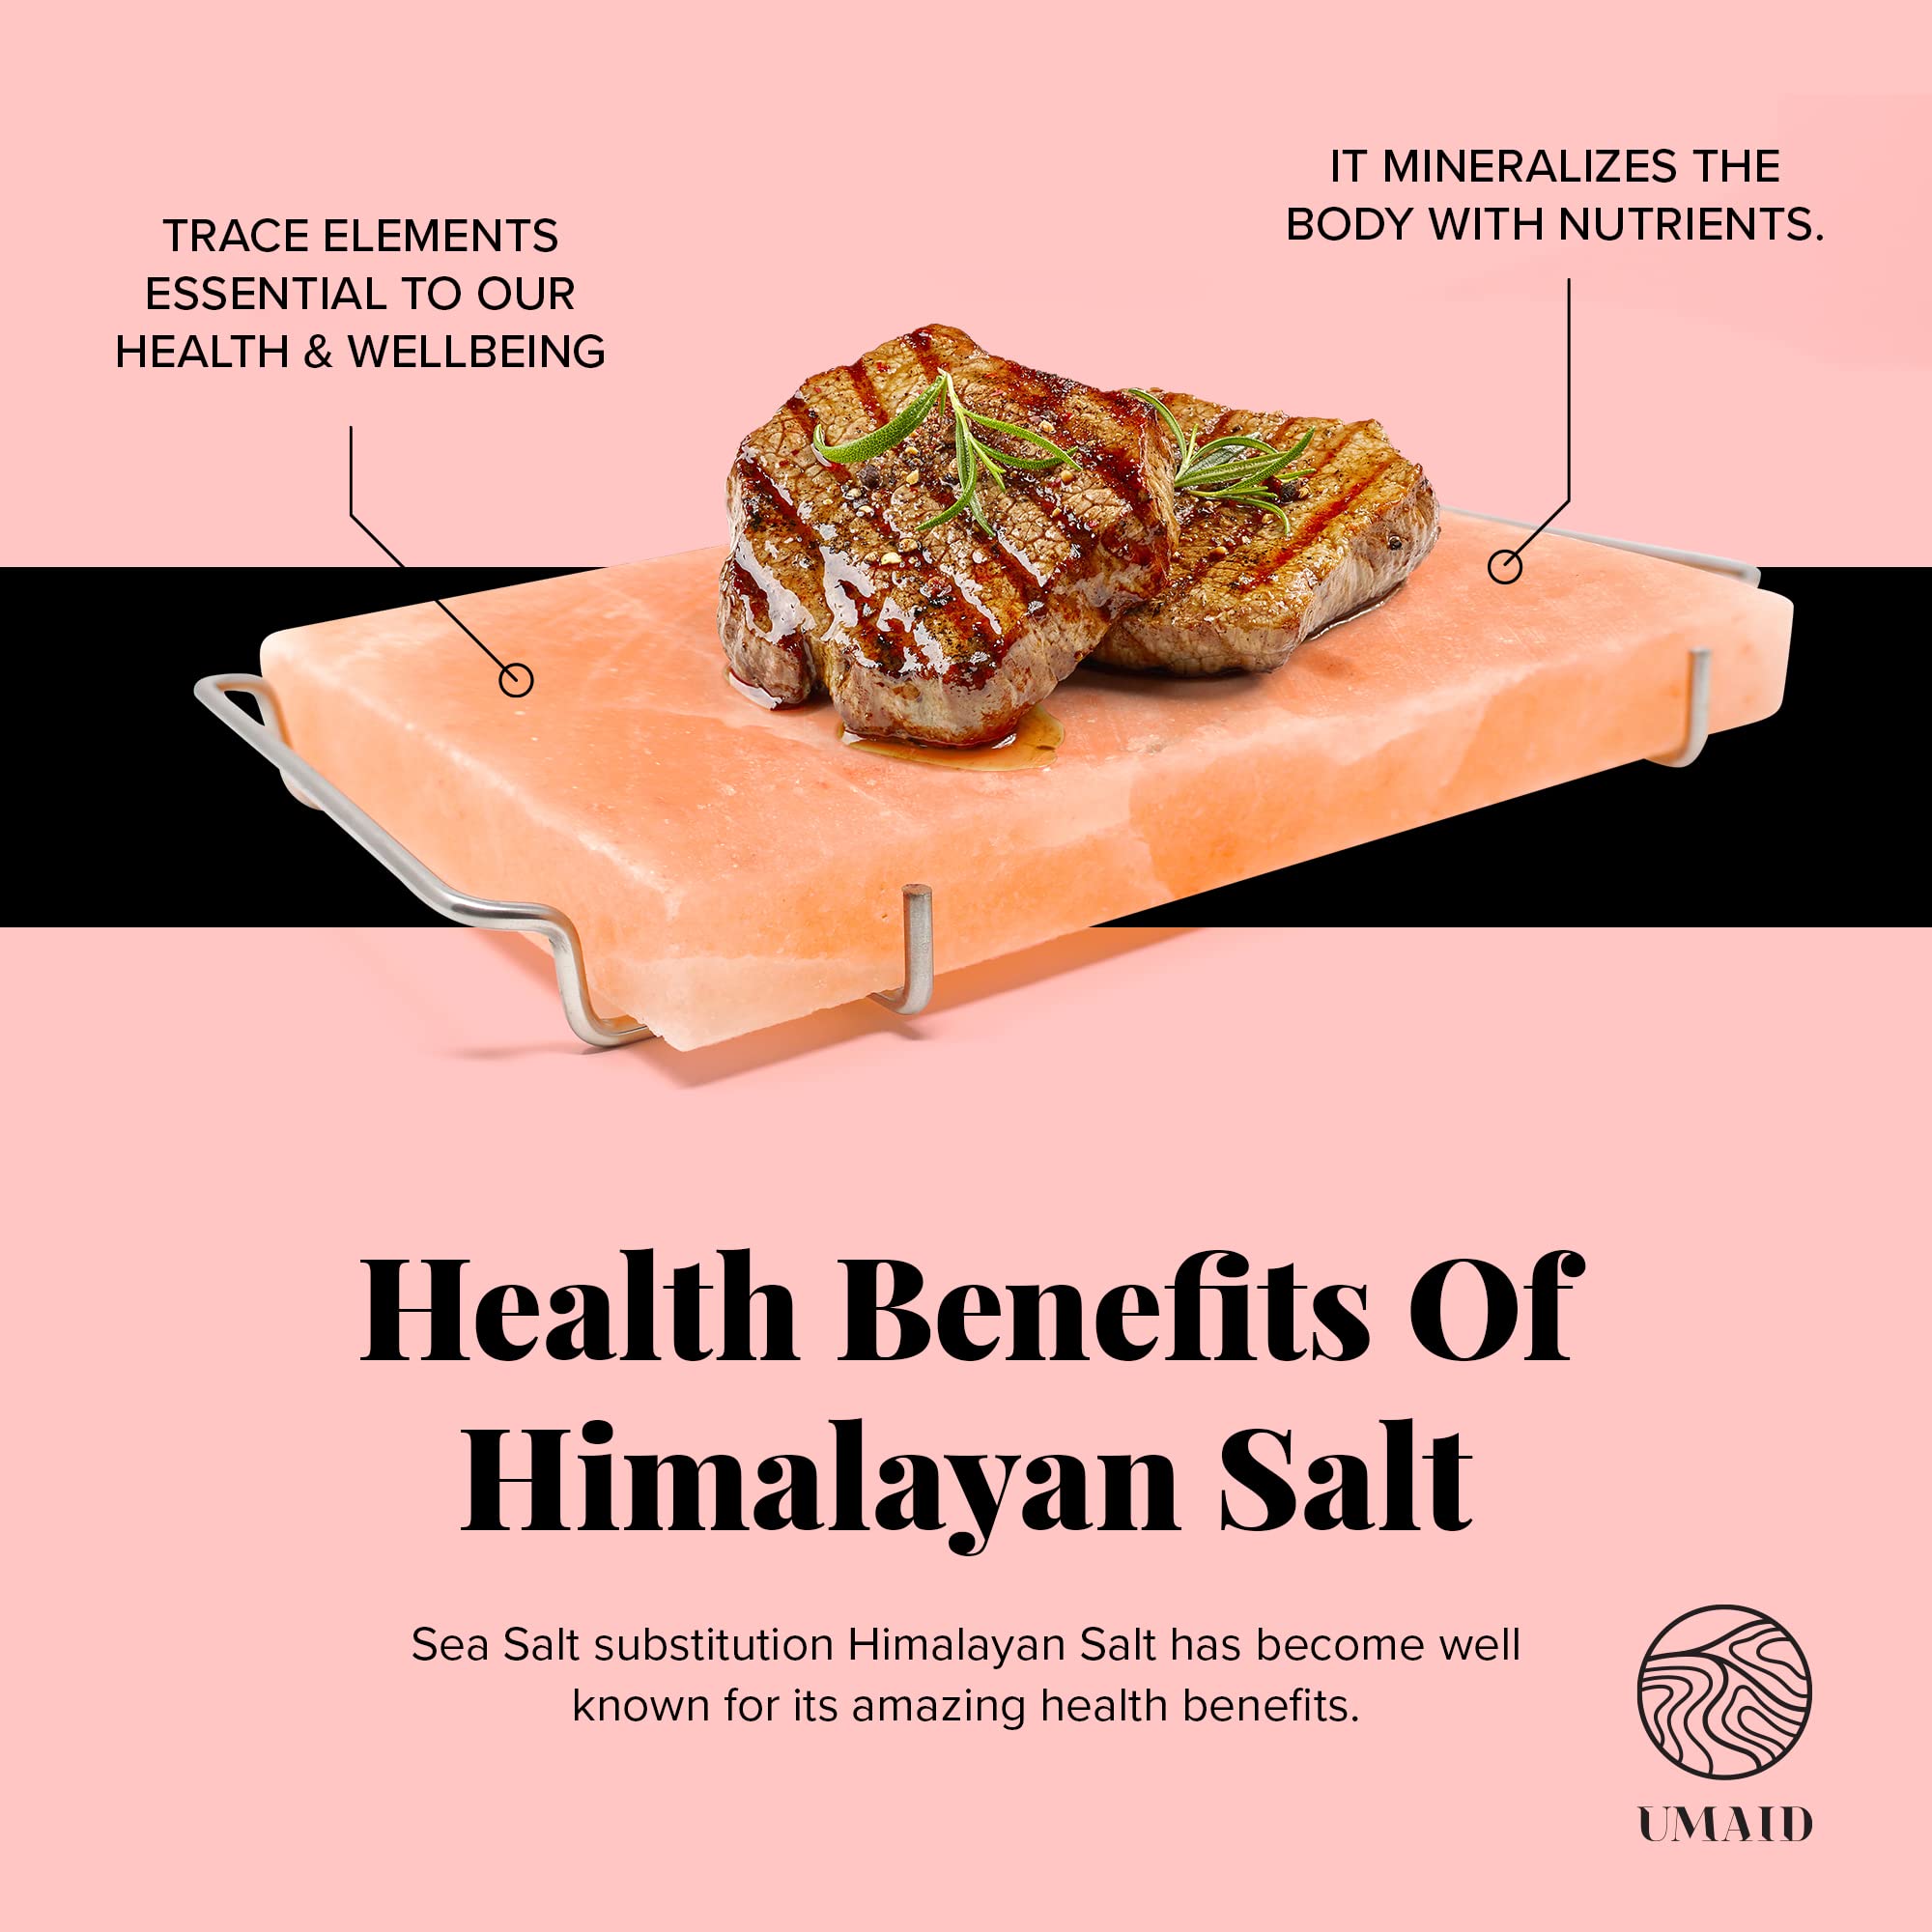 UMAID Himalayan Salt Block For Grilling, Cooking, Cutting and Serving,12X8X1.5 Food Grade Himalayan Pink Salt Stone on Stainless Steel Plate & Recipe Booklet, Unique Gifts for Men, Women, Chef, Cooks